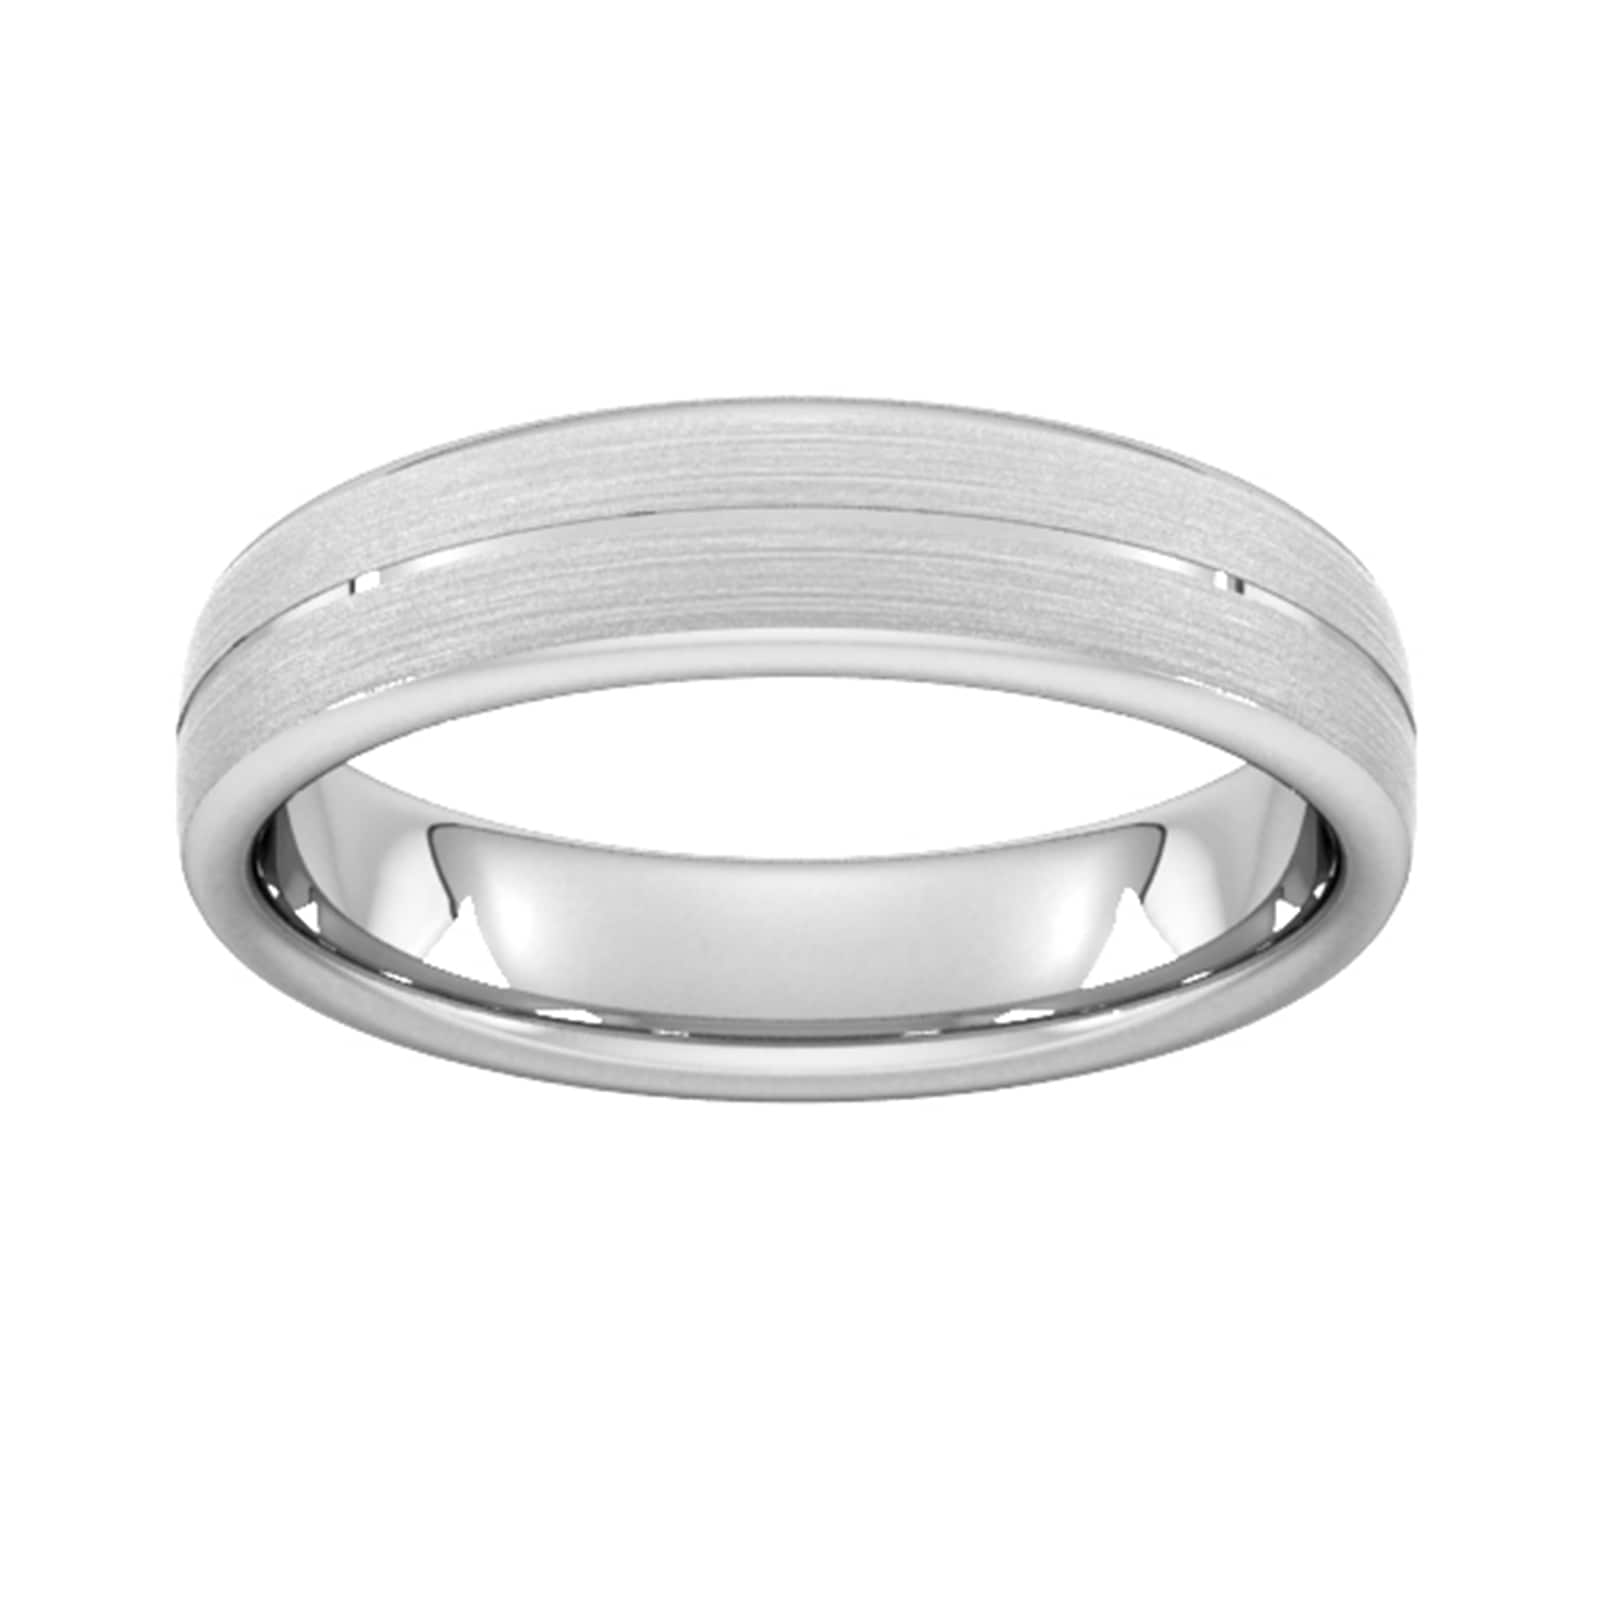 5mm D Shape Heavy Centre Groove With Chamfered Edge Wedding Ring In Platinum - Ring Size M